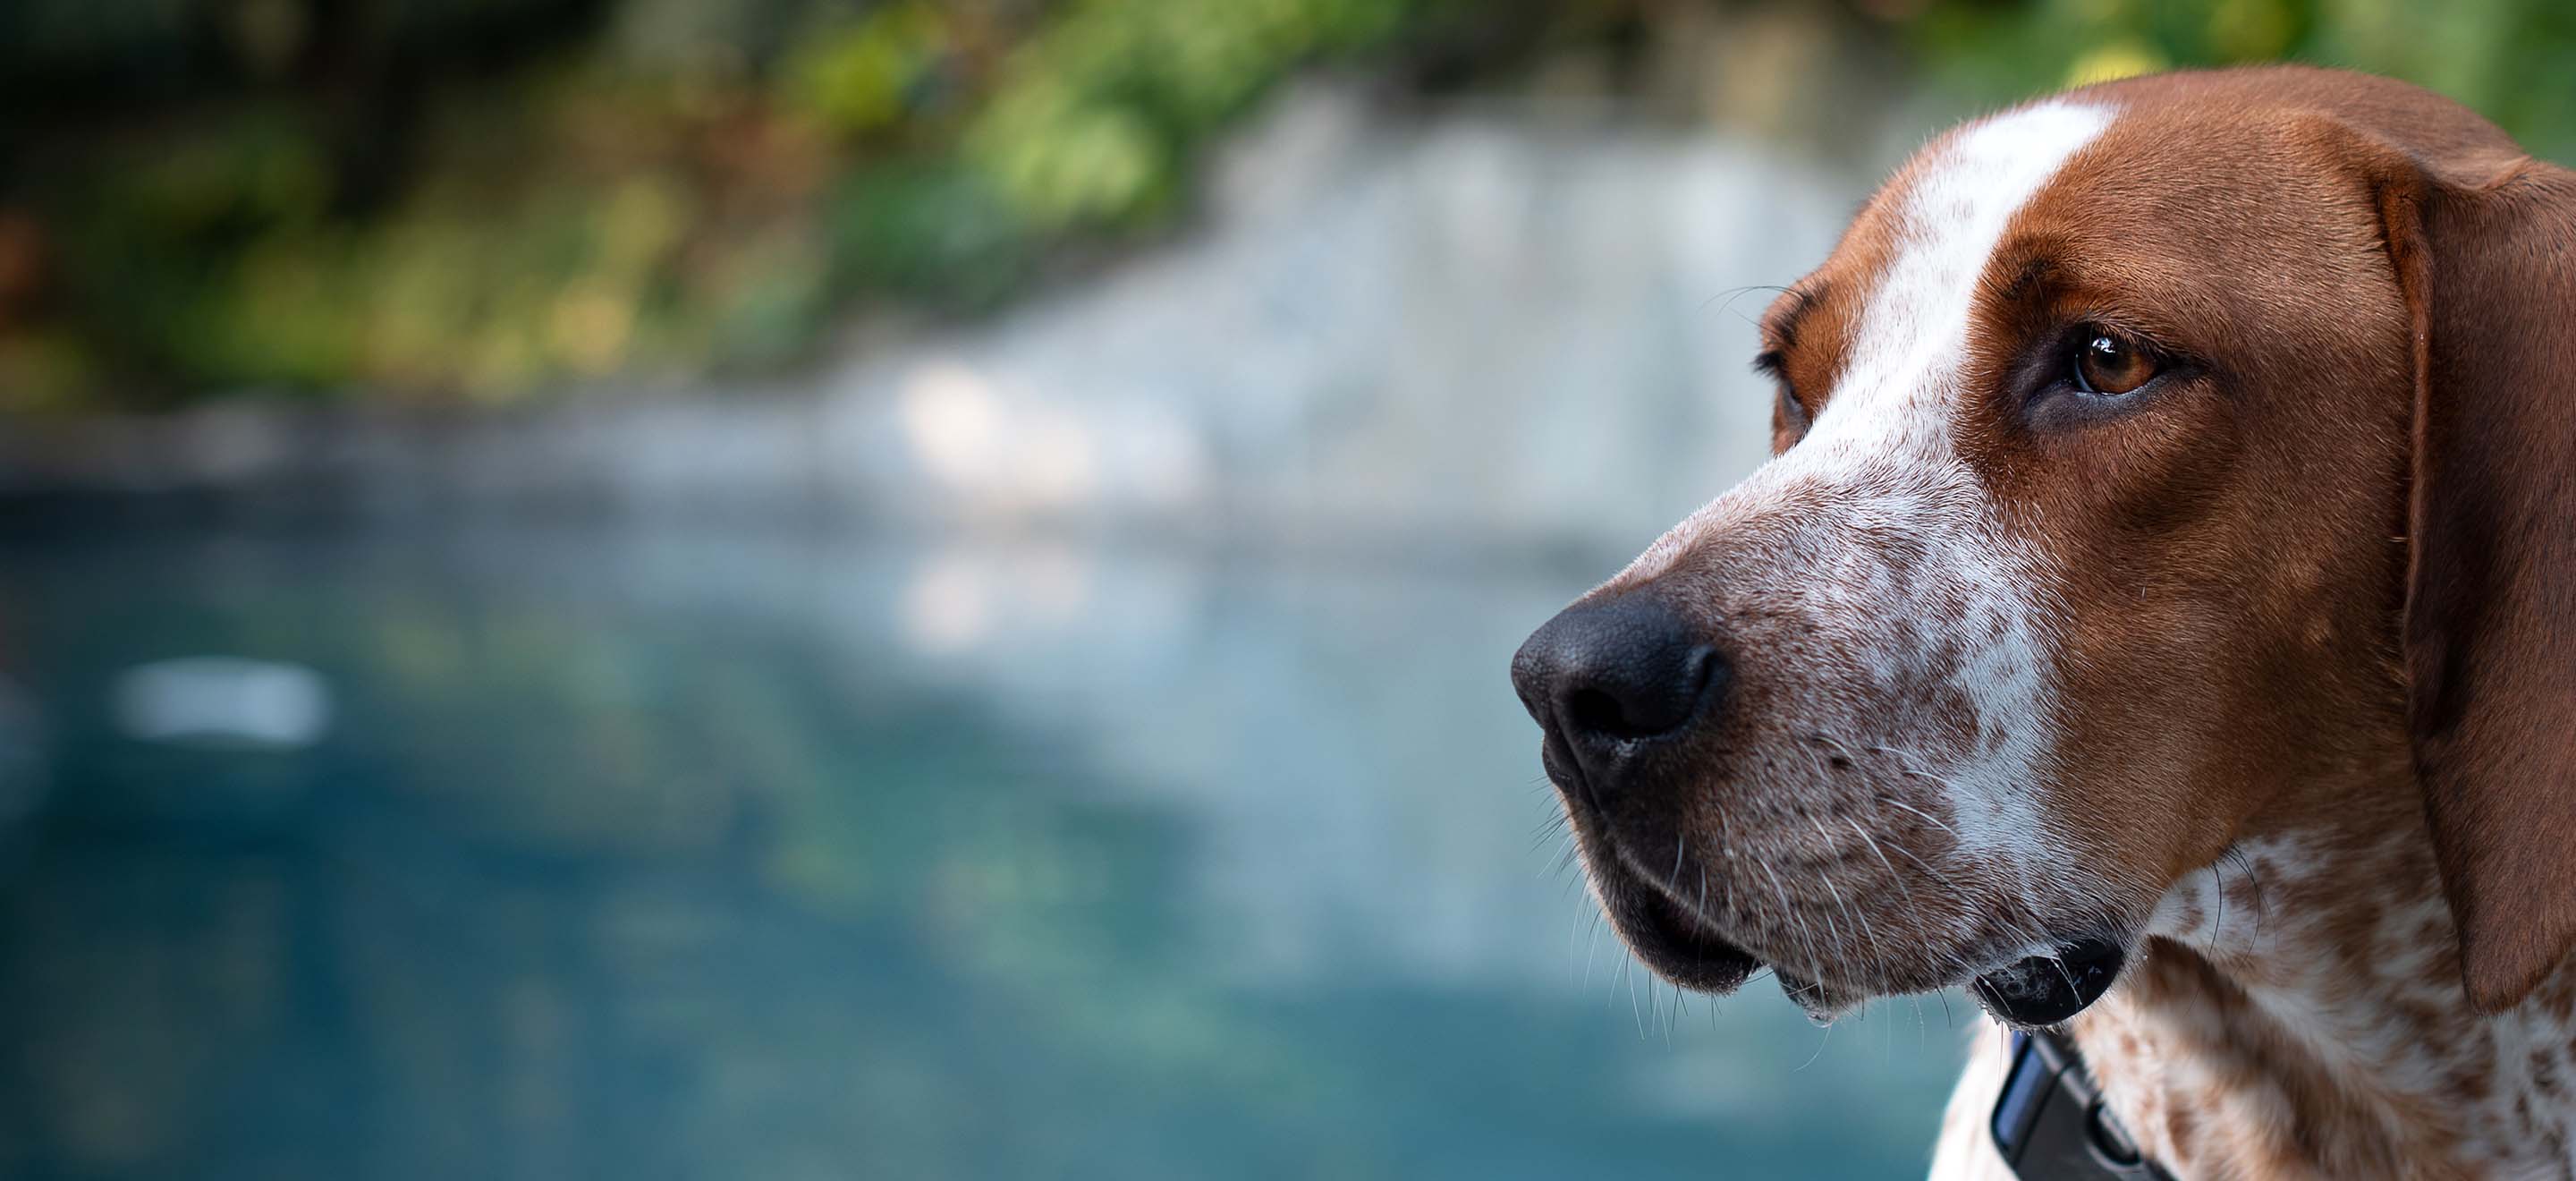 A close-up of a English Redtick Coonhound dog in front of a lake image